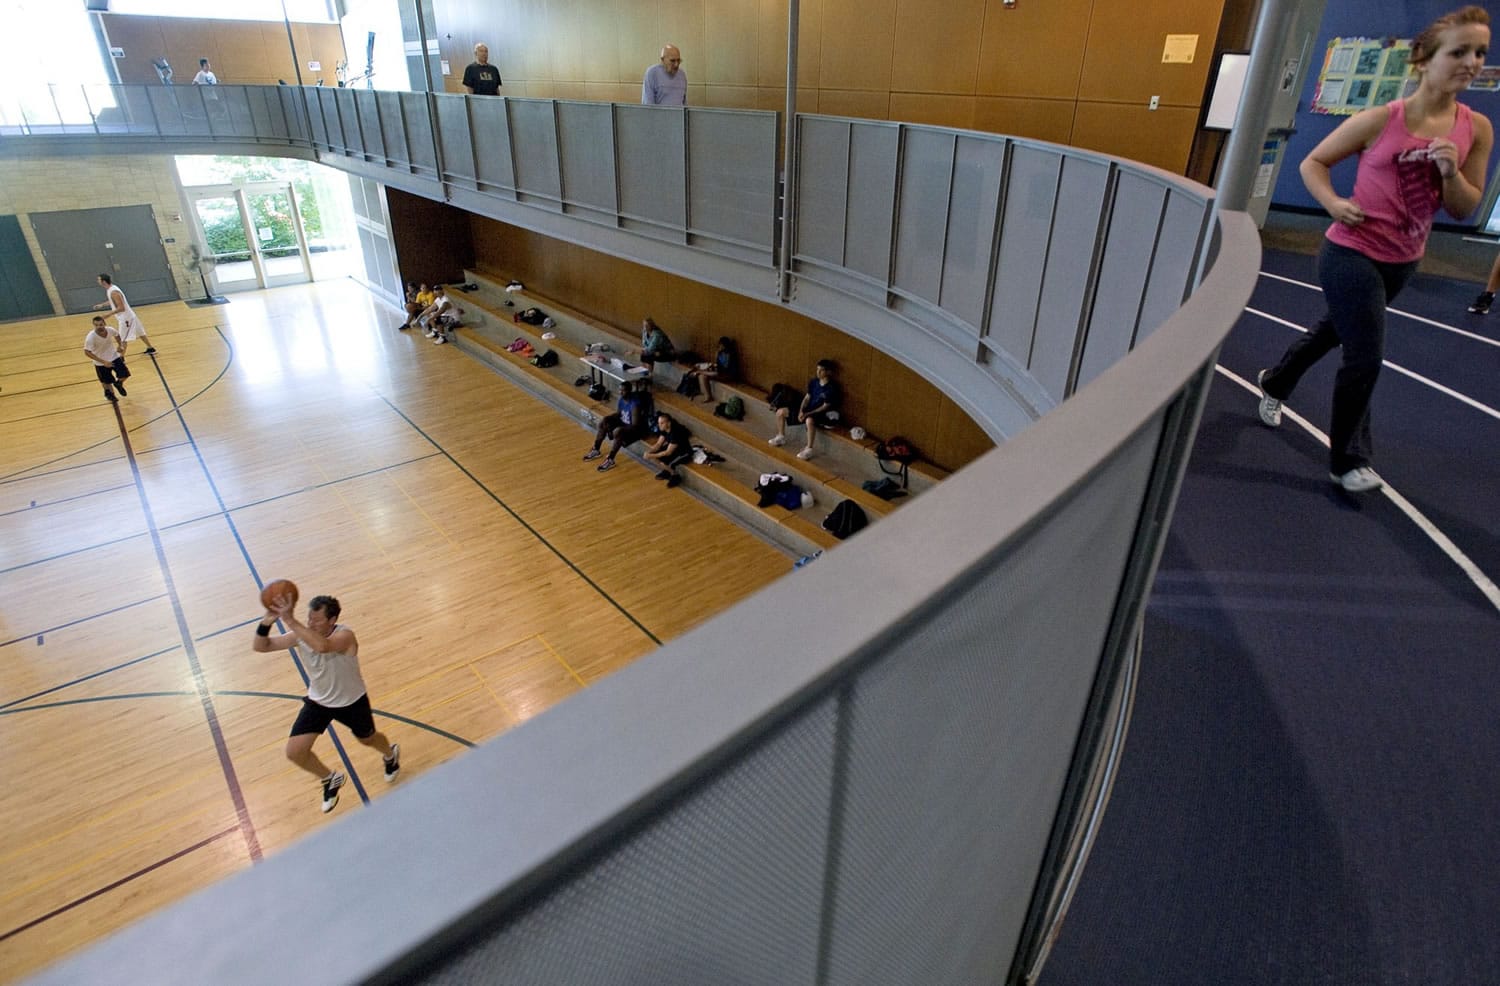 Vancouver's recreation centers are struggling to make enough money to support programs, and had to lay off 17 people this month.